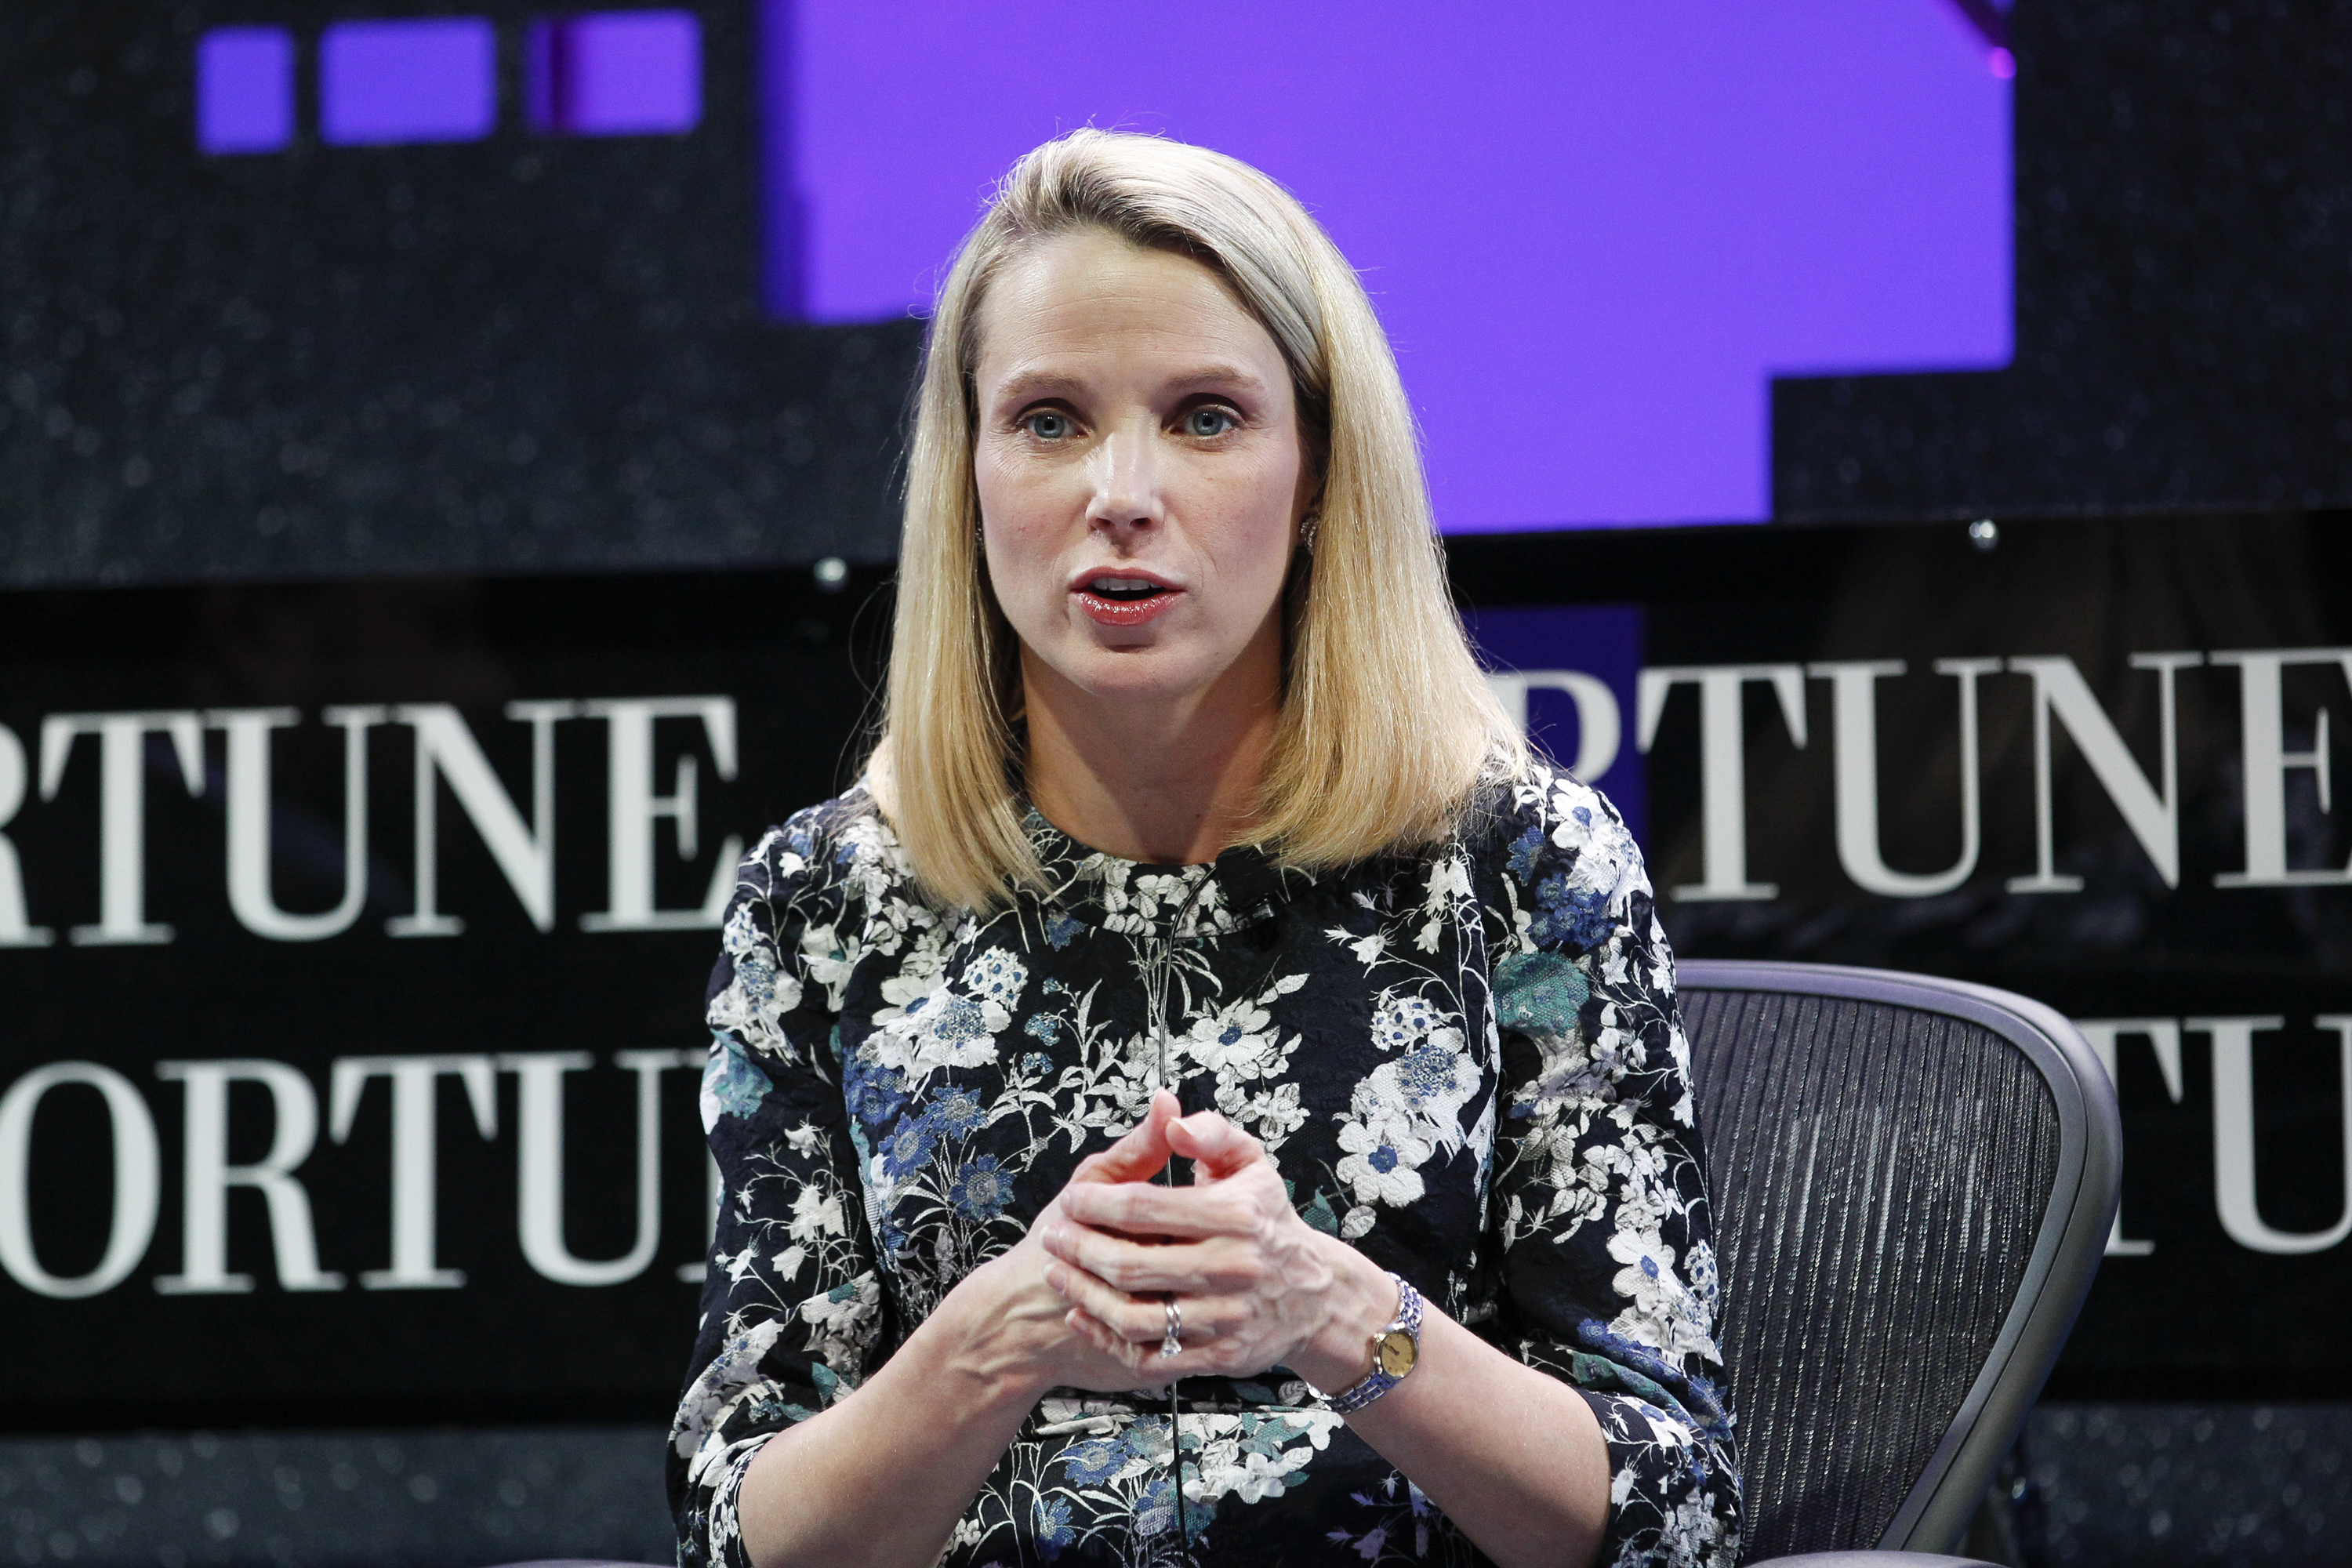 Marissa Mayer speaks during the Fortune Global Forum - Day2 at the Fairmont Hotel on Nov. 3, 2015 in San Francisco, California. (Kimberly White—2015 Getty Images)